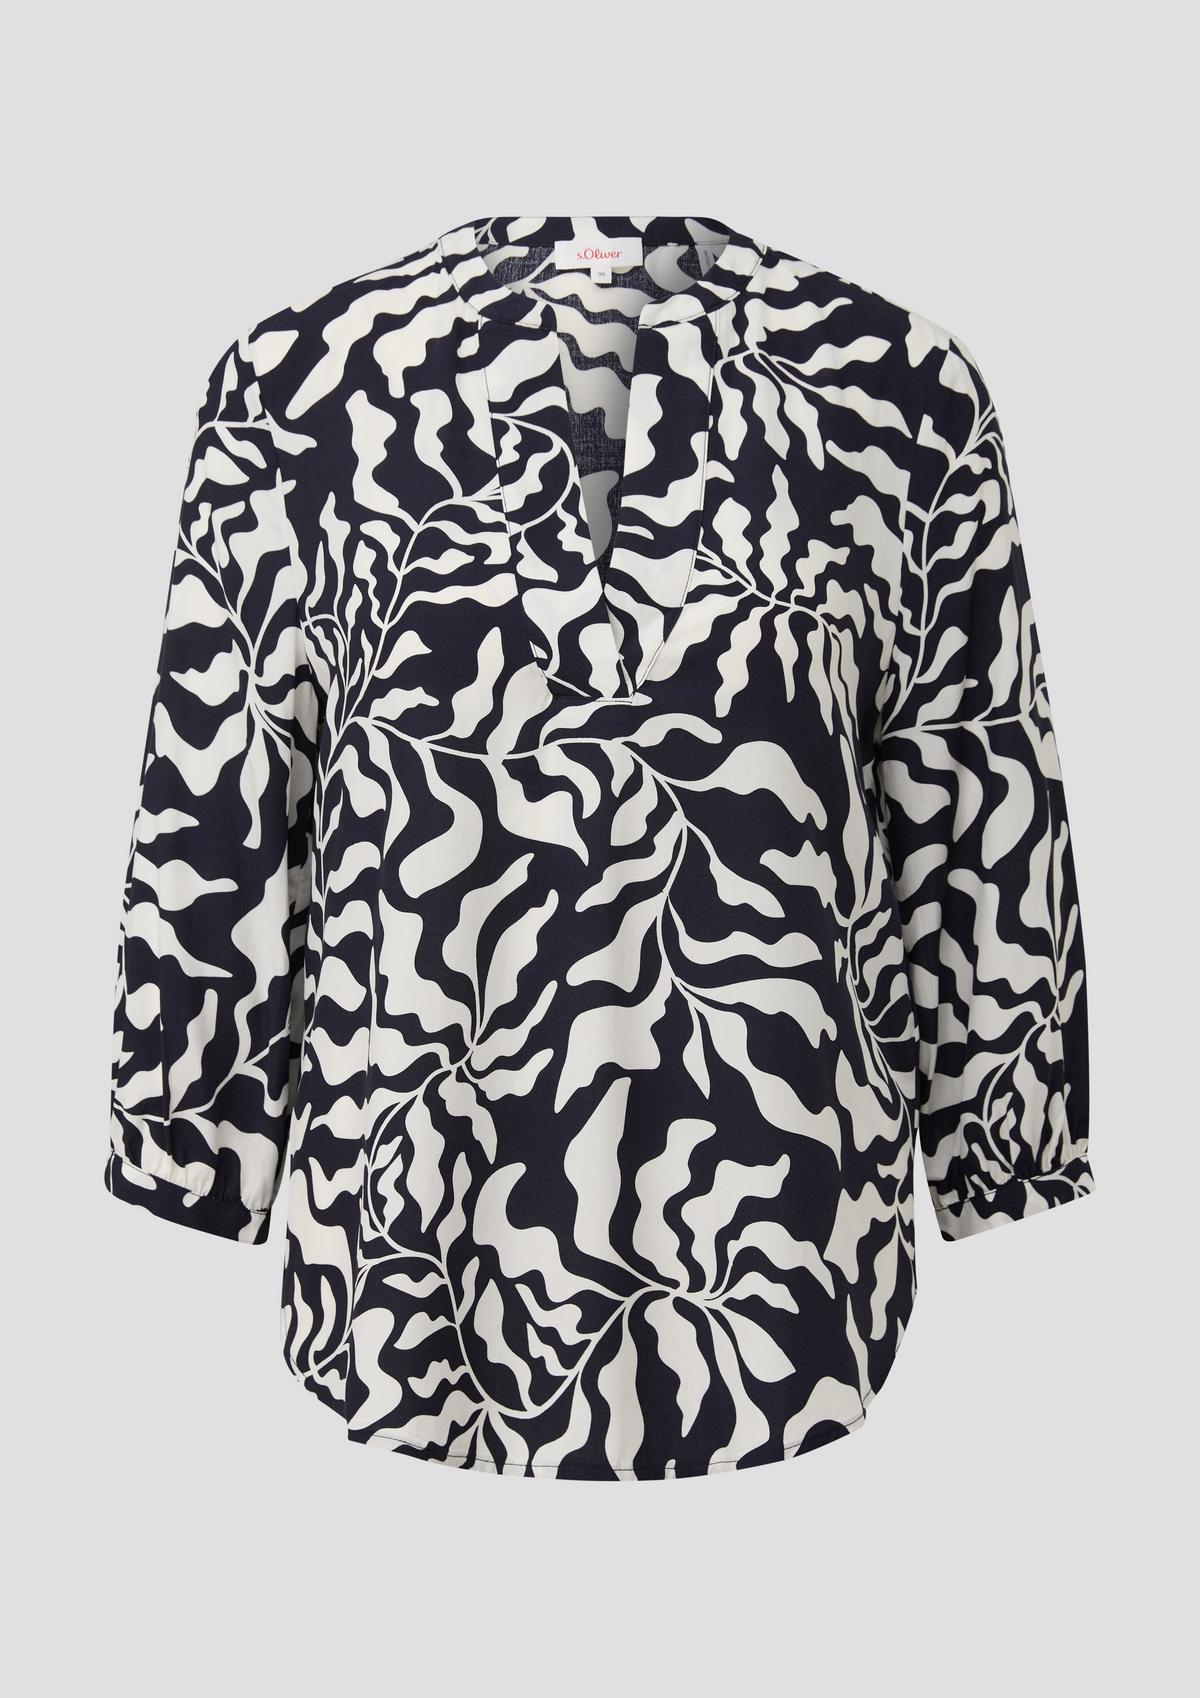 s.Oliver Tuniekblouse met print all-over